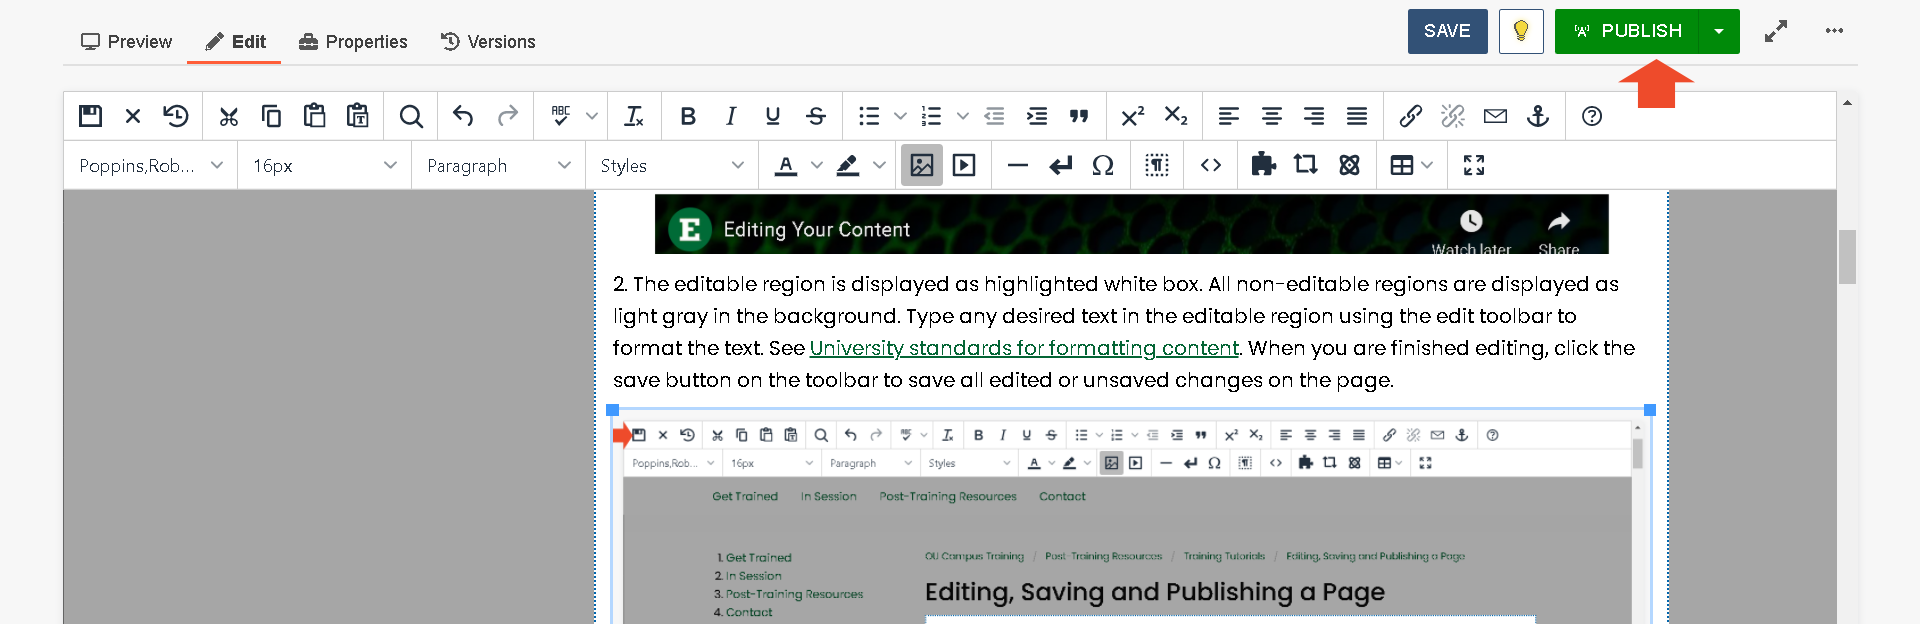 A screen shot of the first publish button